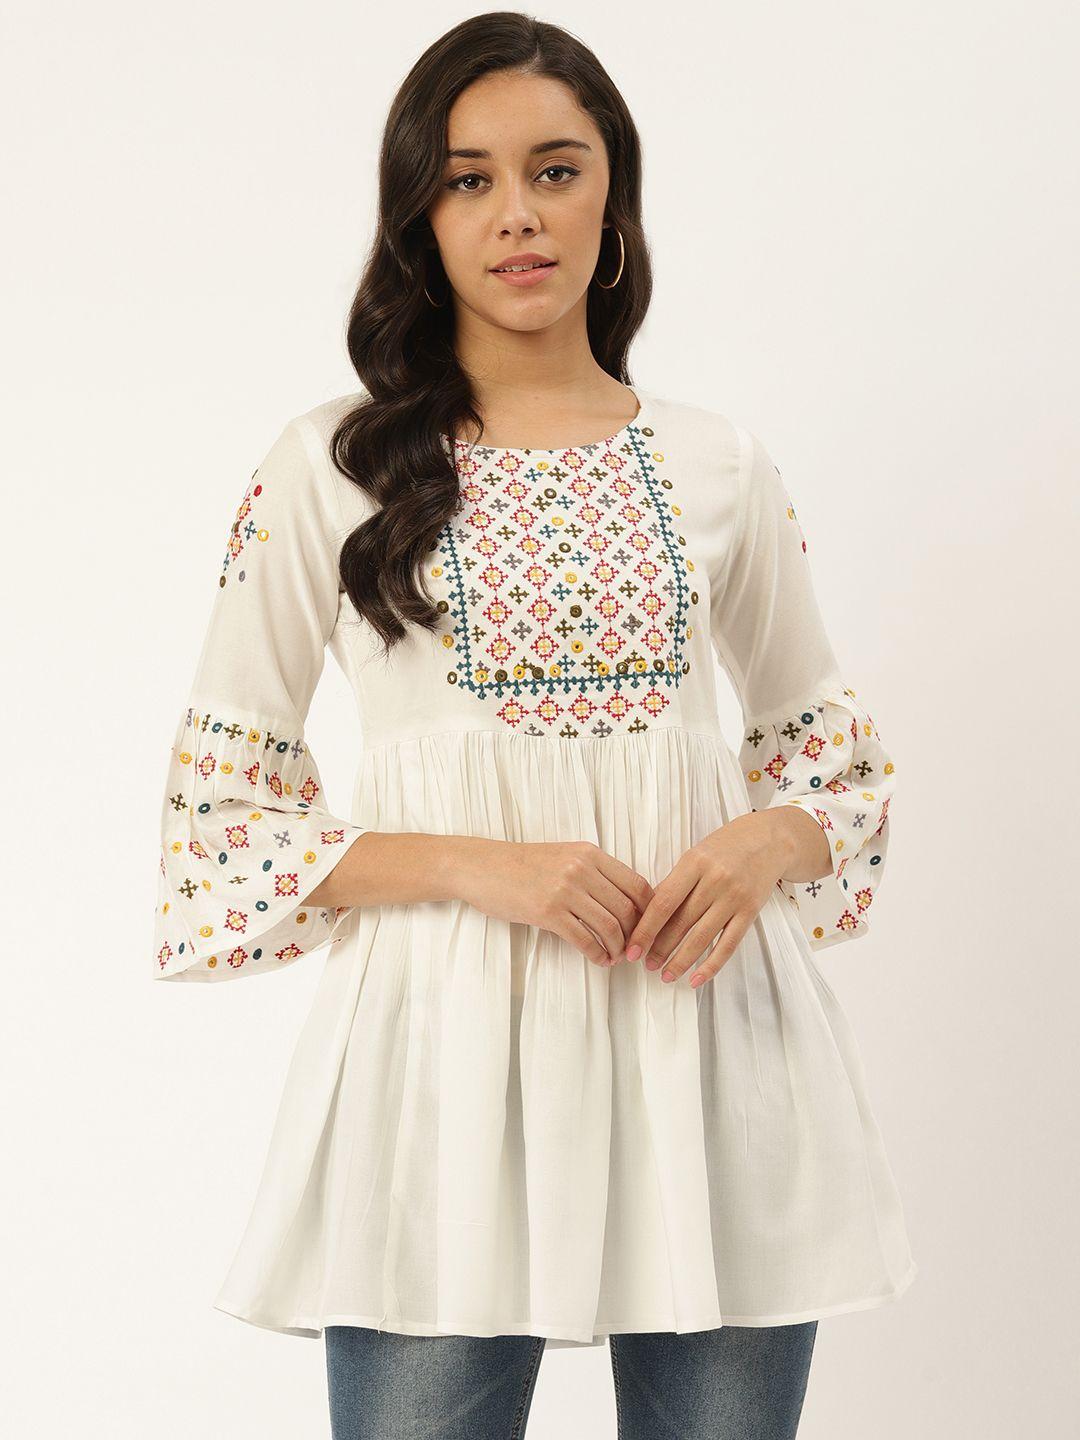 rangmayee-women's-off-white-&-red-embroidered-tunic